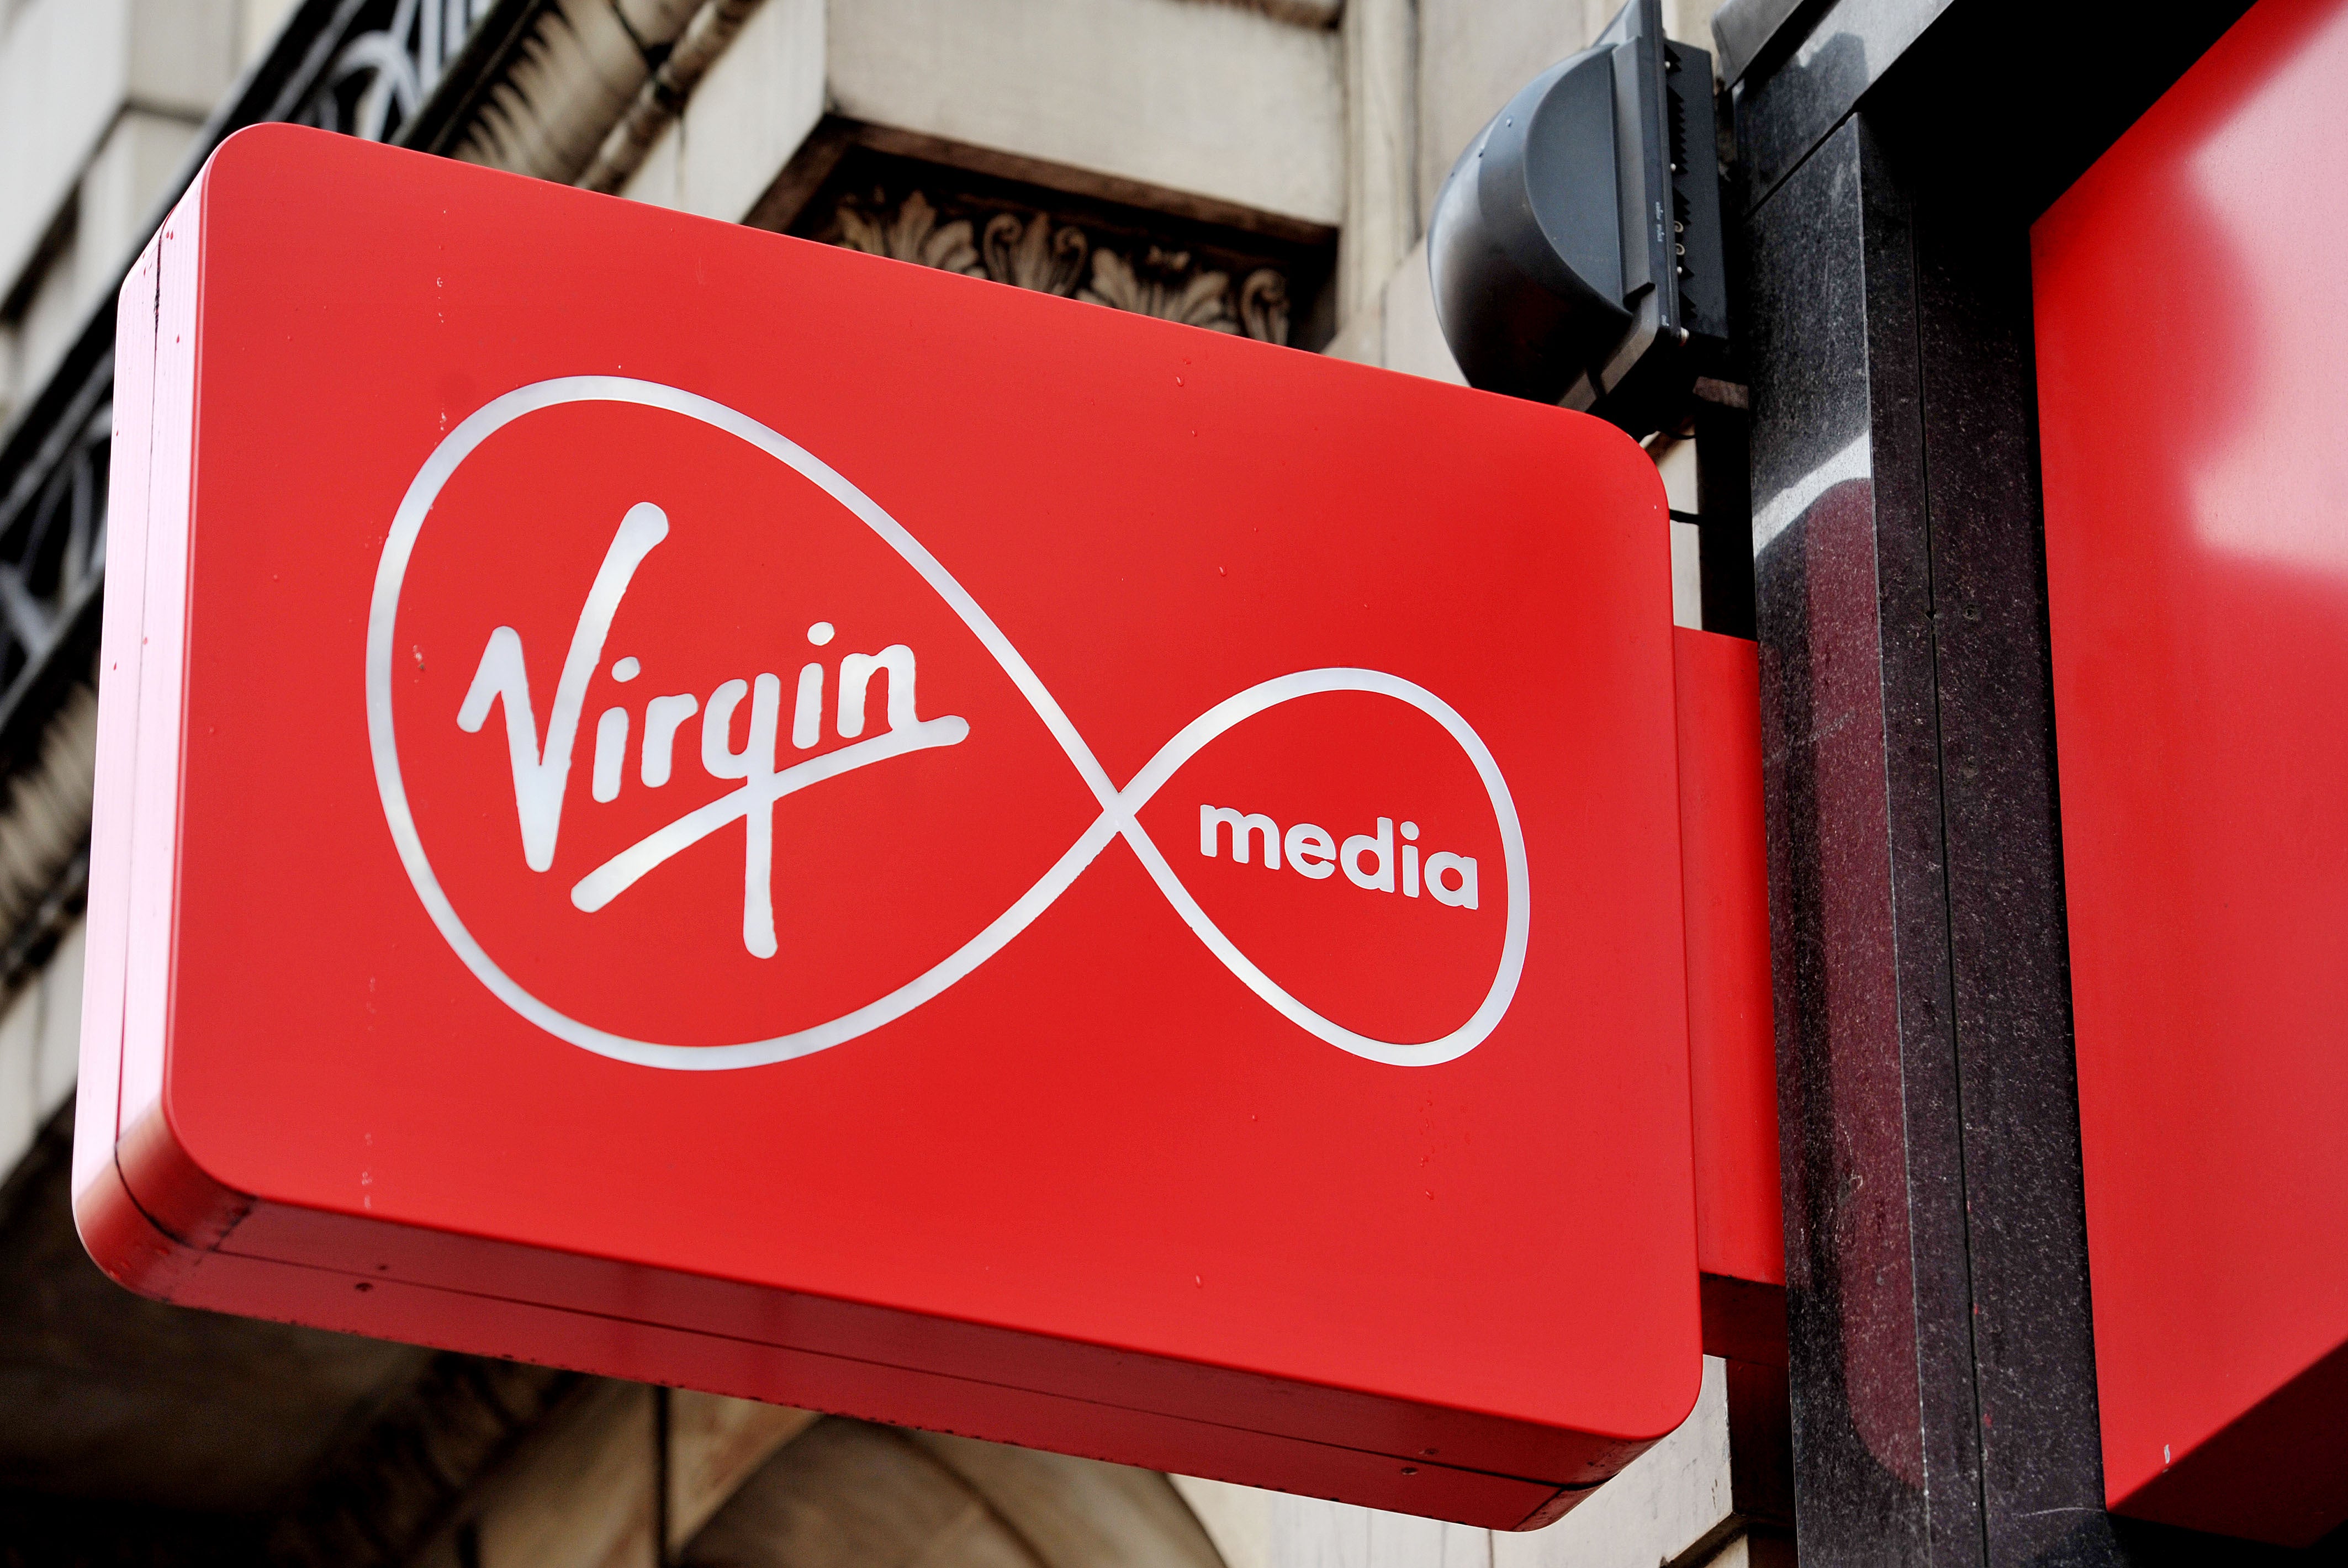 Virgin Media has been hit with a service issue caused by a ‘major power outage’ (PA)